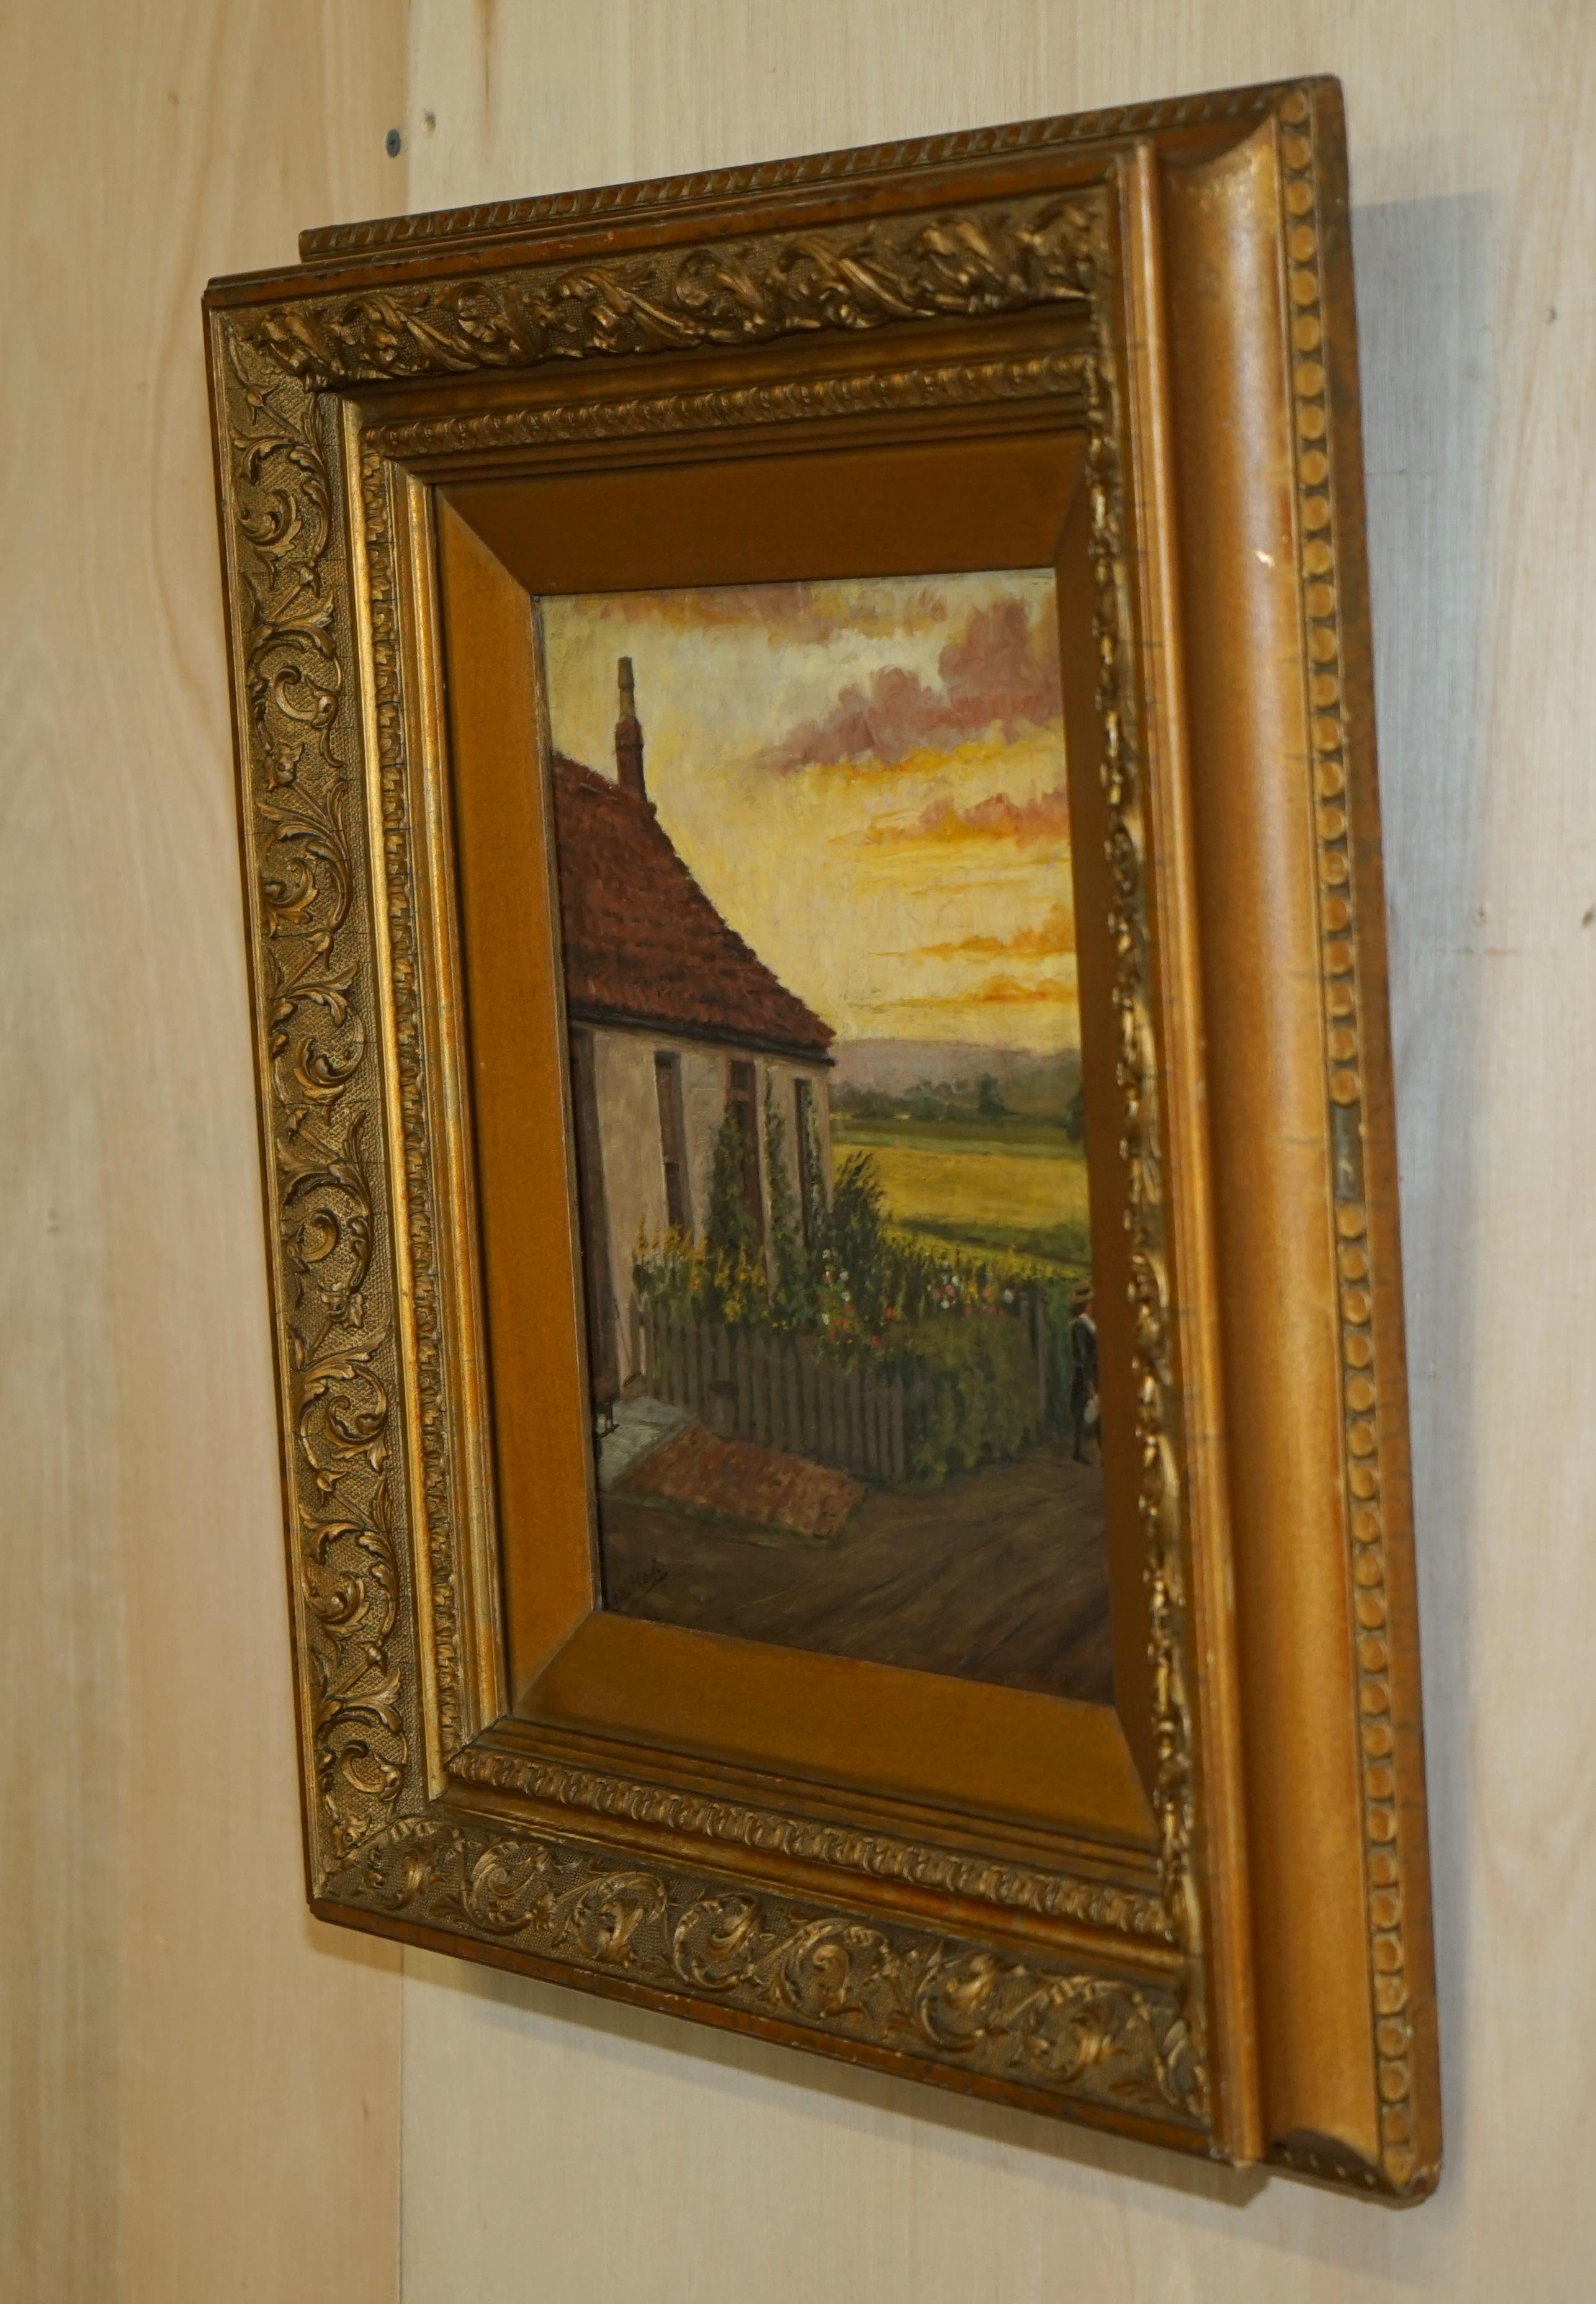 EXQUISITE 1894 SiGNED & DATED OIL ON CANVAS IN ORIGINAL FRAME OF FARM COTTAGE 4